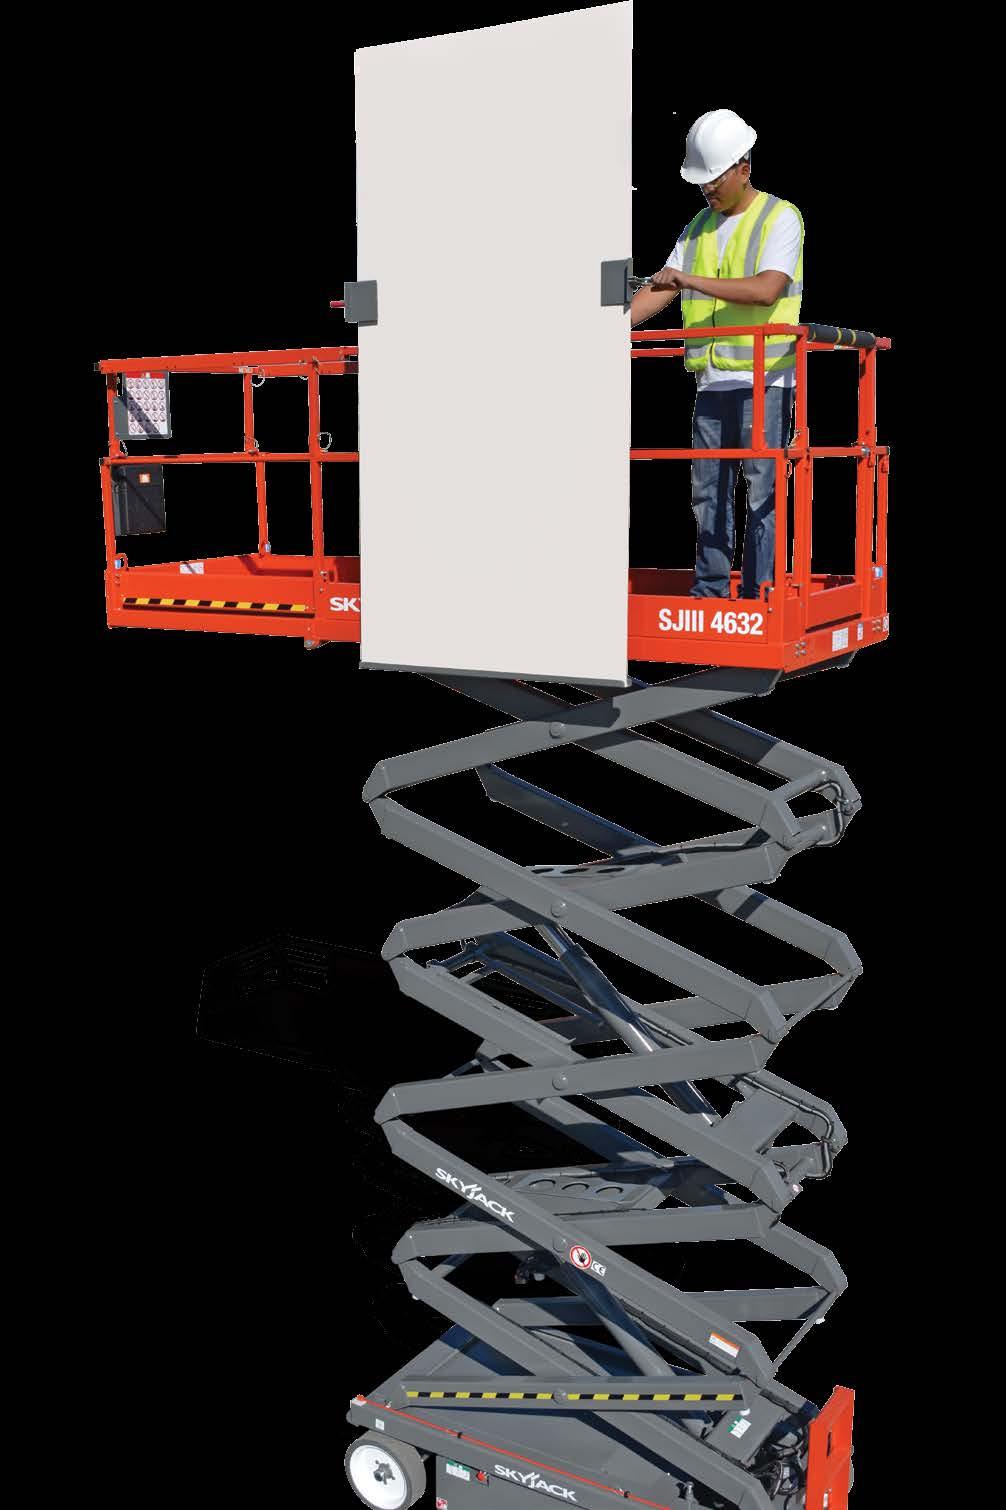 BOARD CARRIER Designed, tested, and certified by Skyjack Easy to install, the board carrier is designed specifically for applications that require holding and lifting sheet materials.